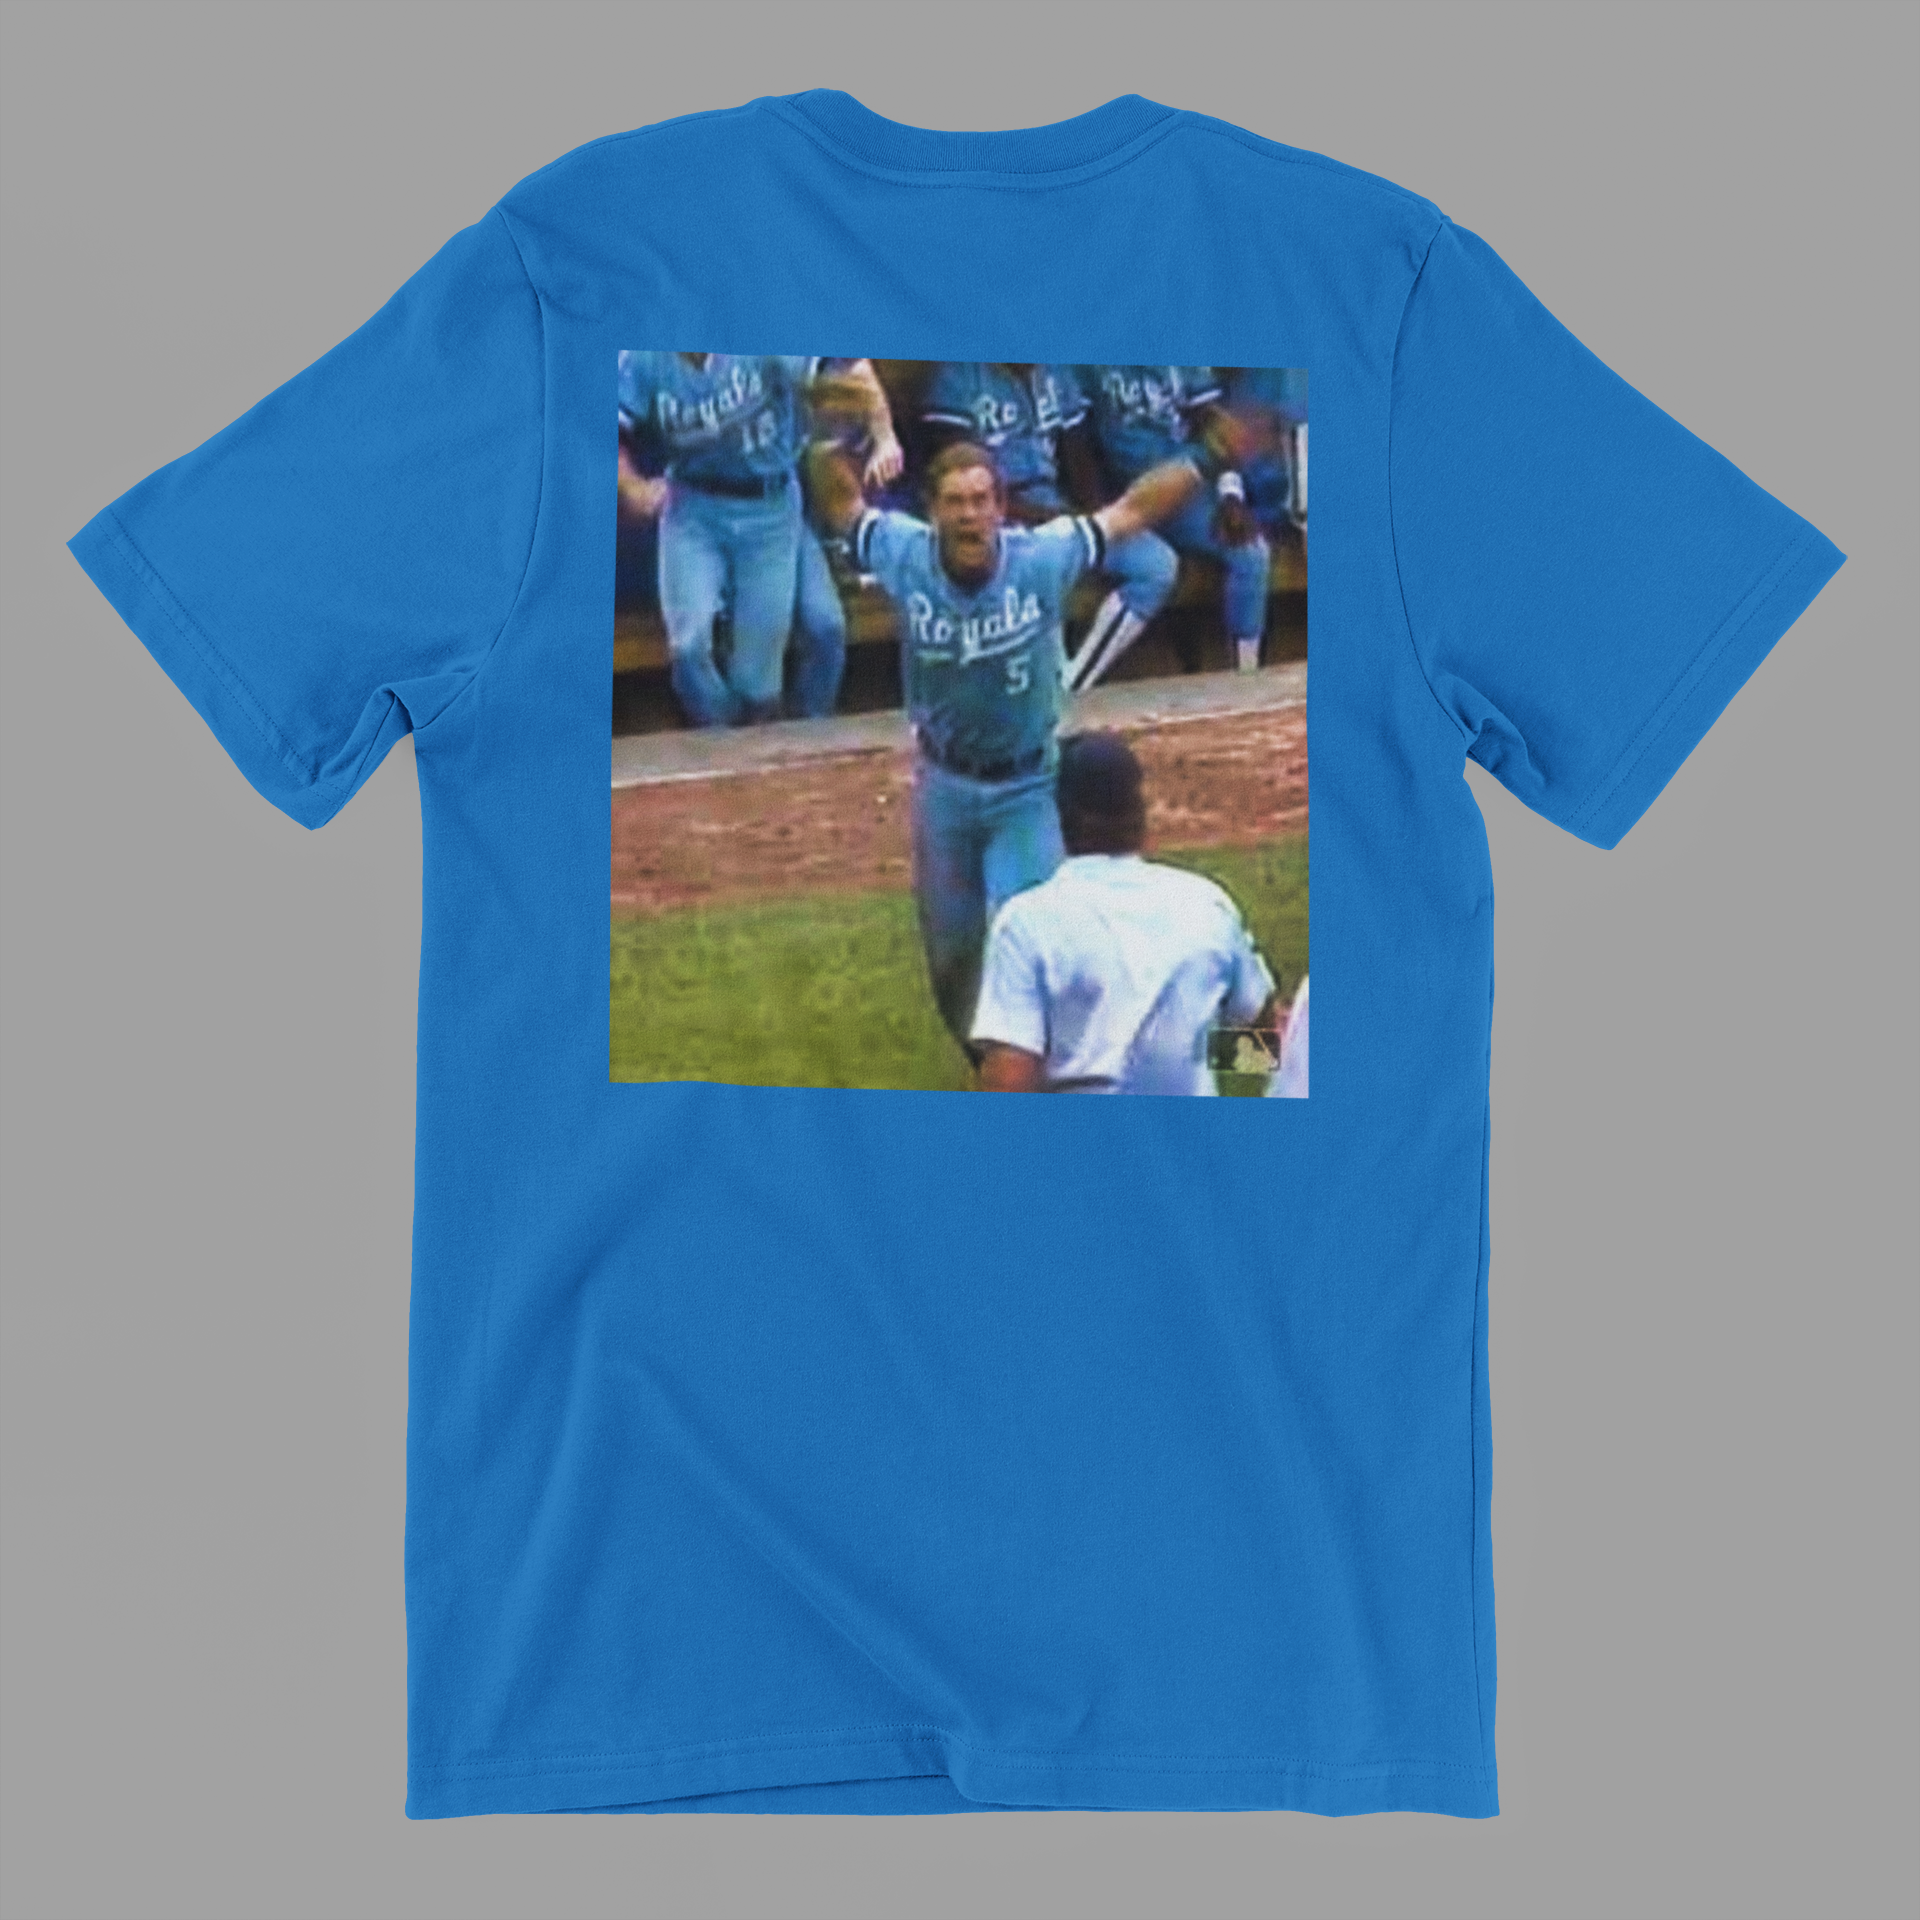 George Brett Pine Tar incident shirt now available from BreakingT